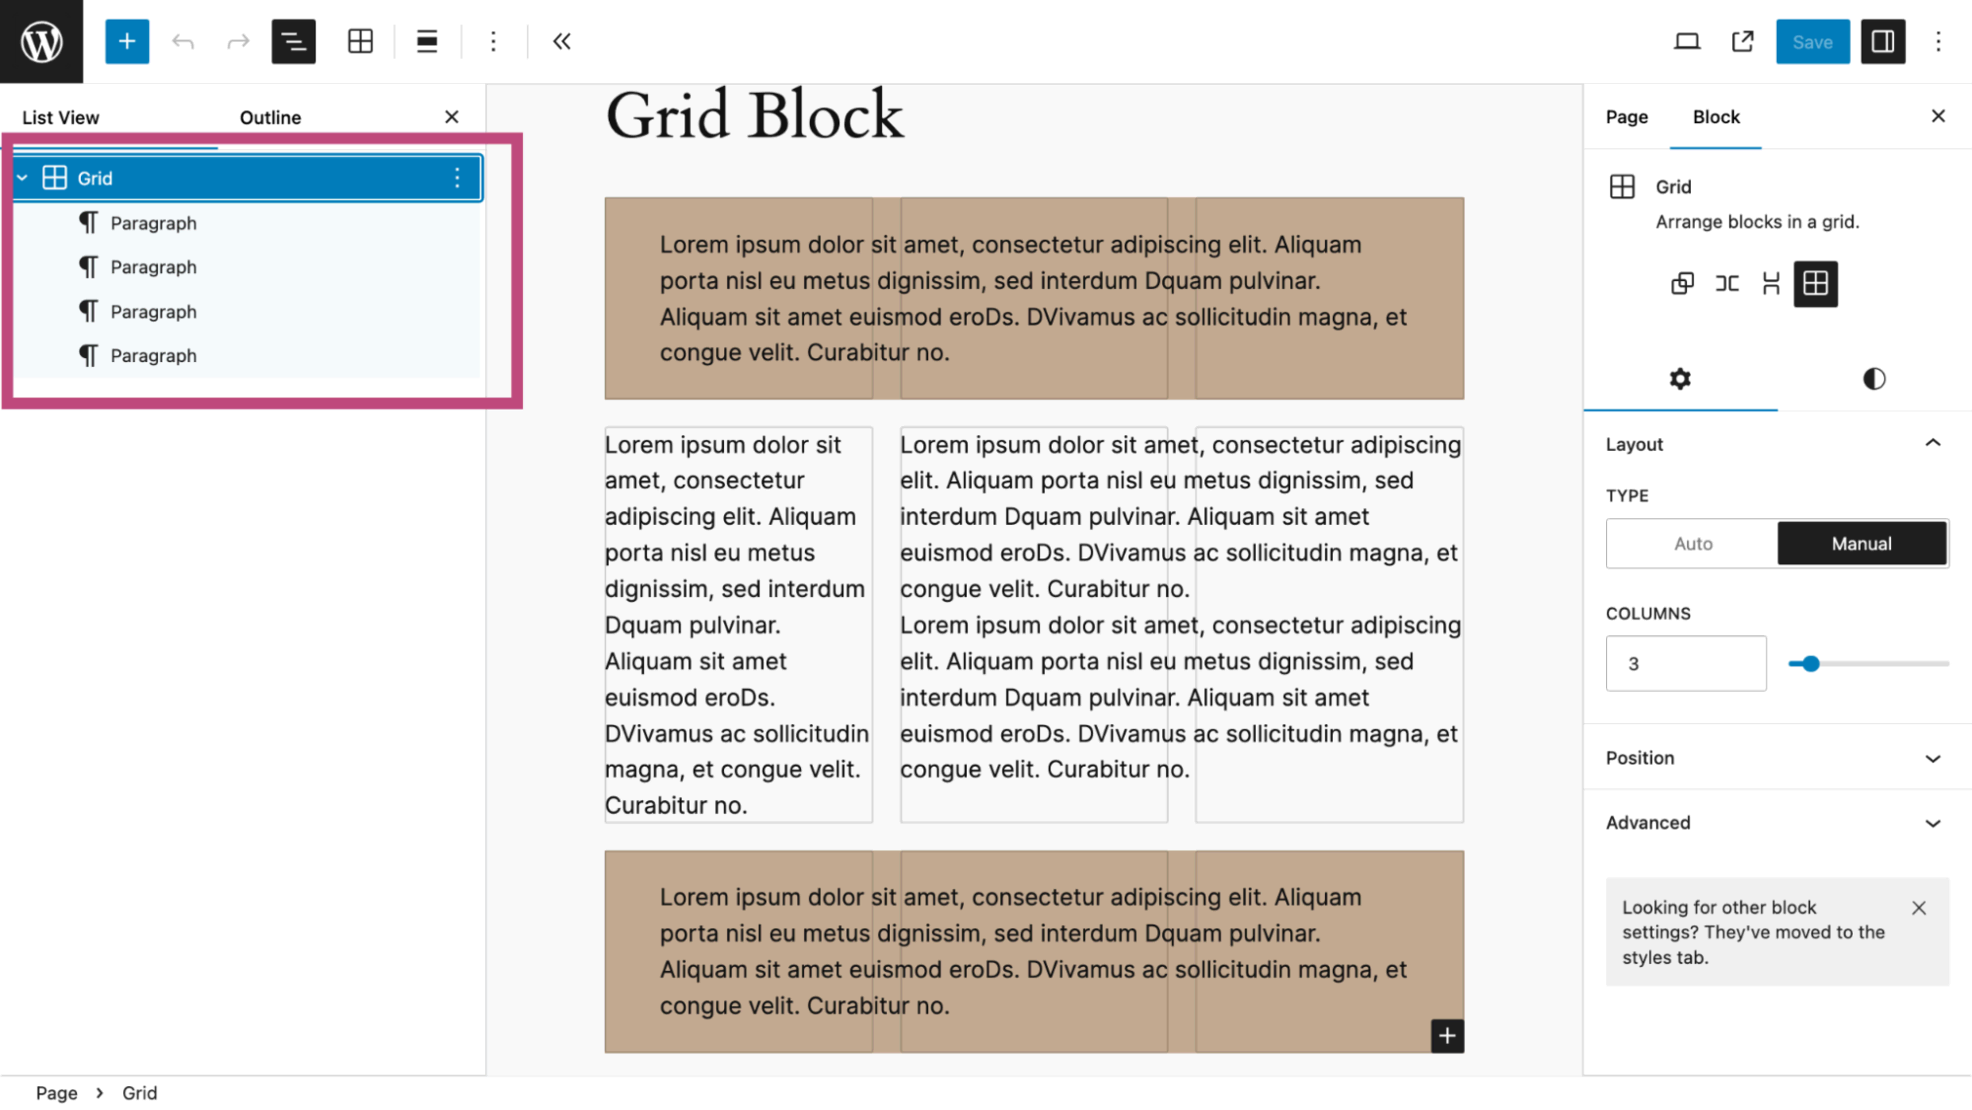 The entire content of the grid block, consisting of four paragraph blocks